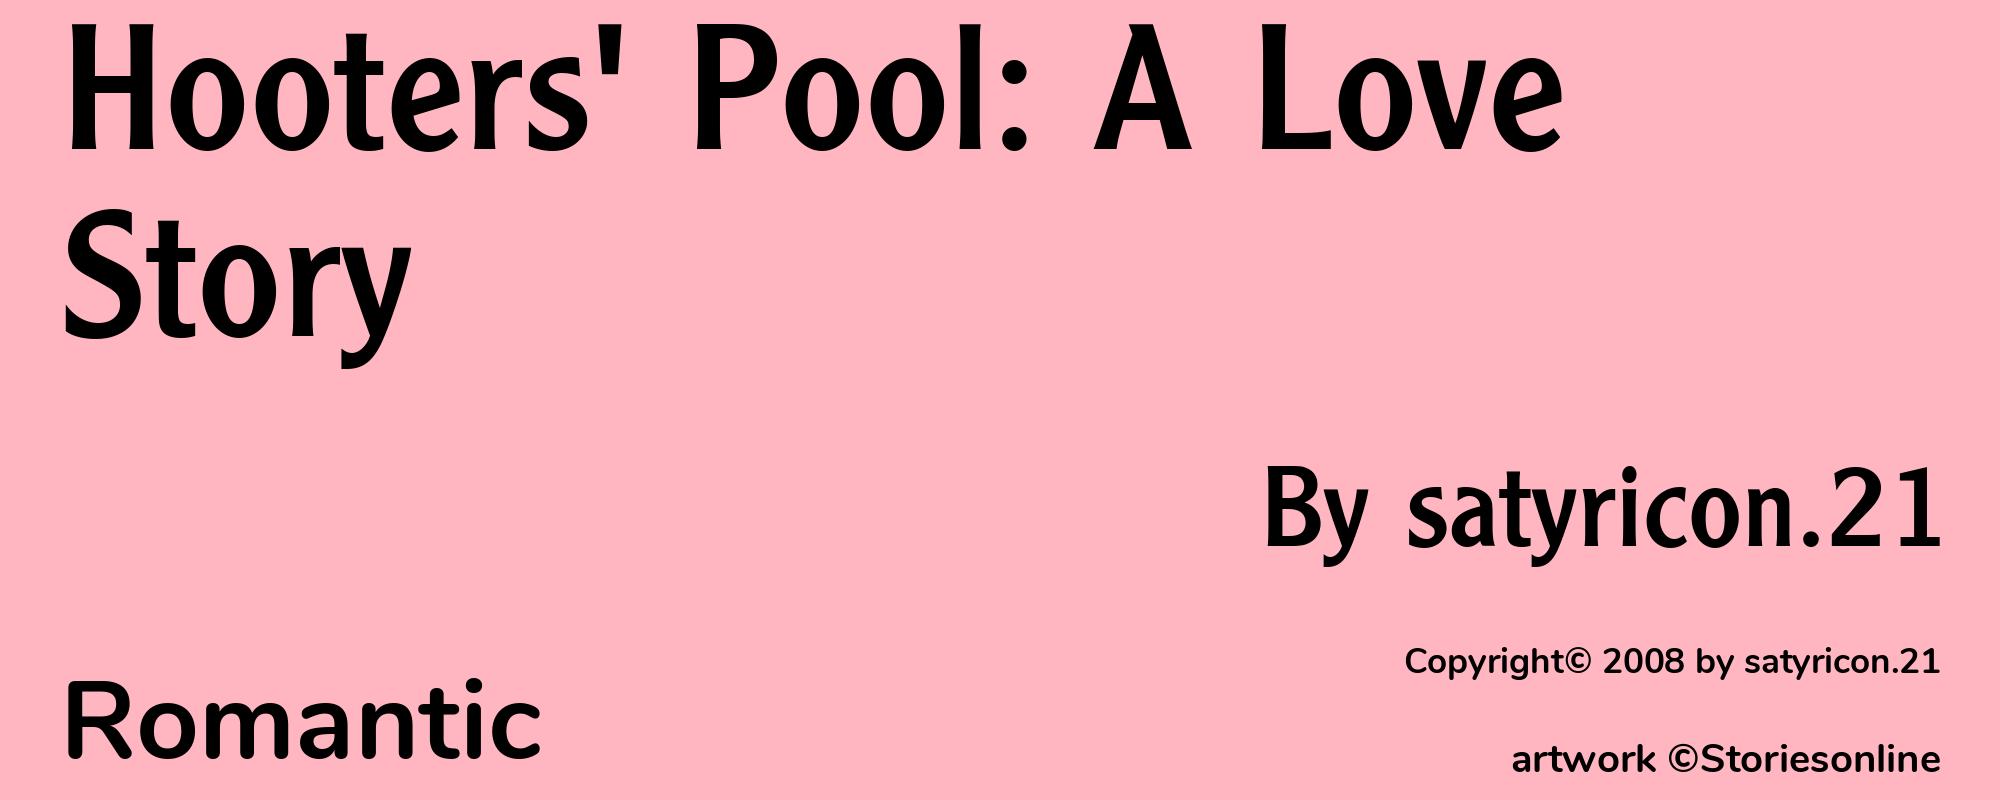 Hooters' Pool: A Love Story - Cover